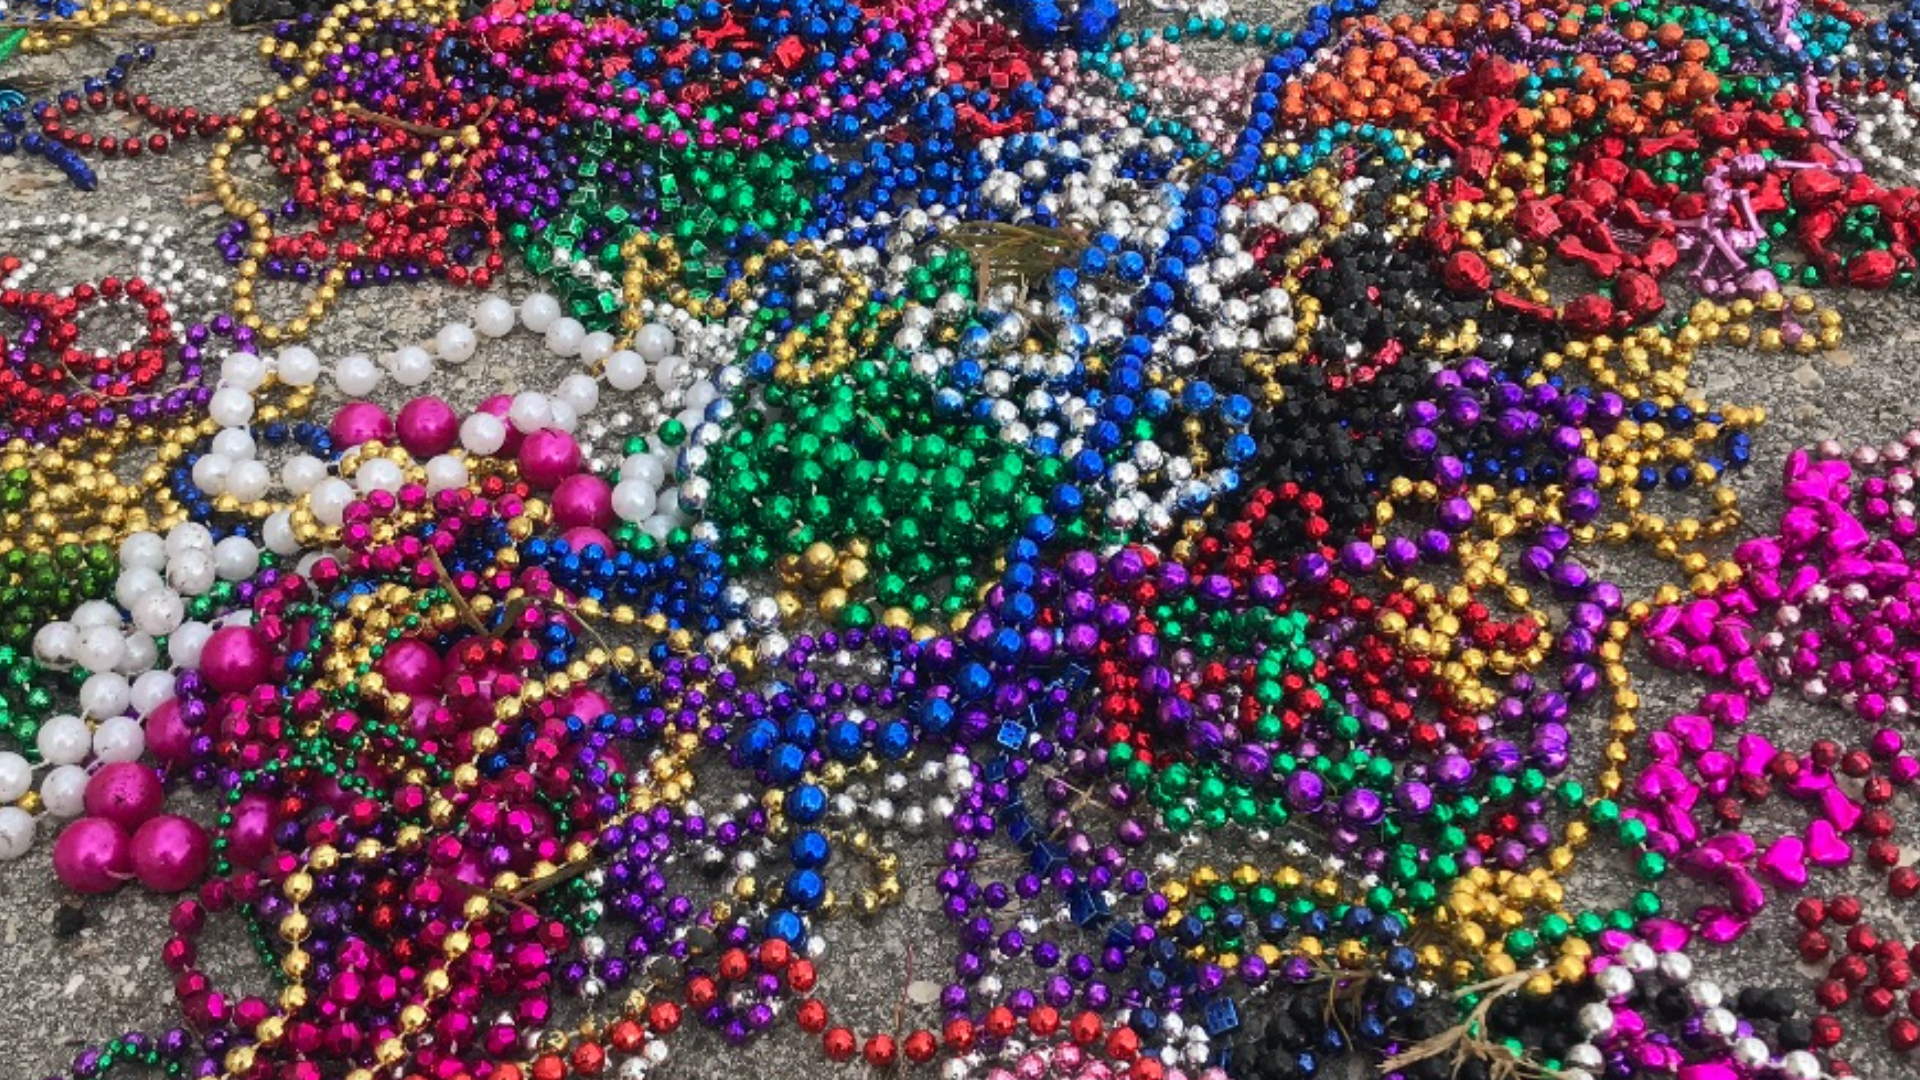 If you're planning on throwing beads into Tampa Bay during upcoming celebrations in Tampa, Mayor Jane Castor has a message for you: don't.